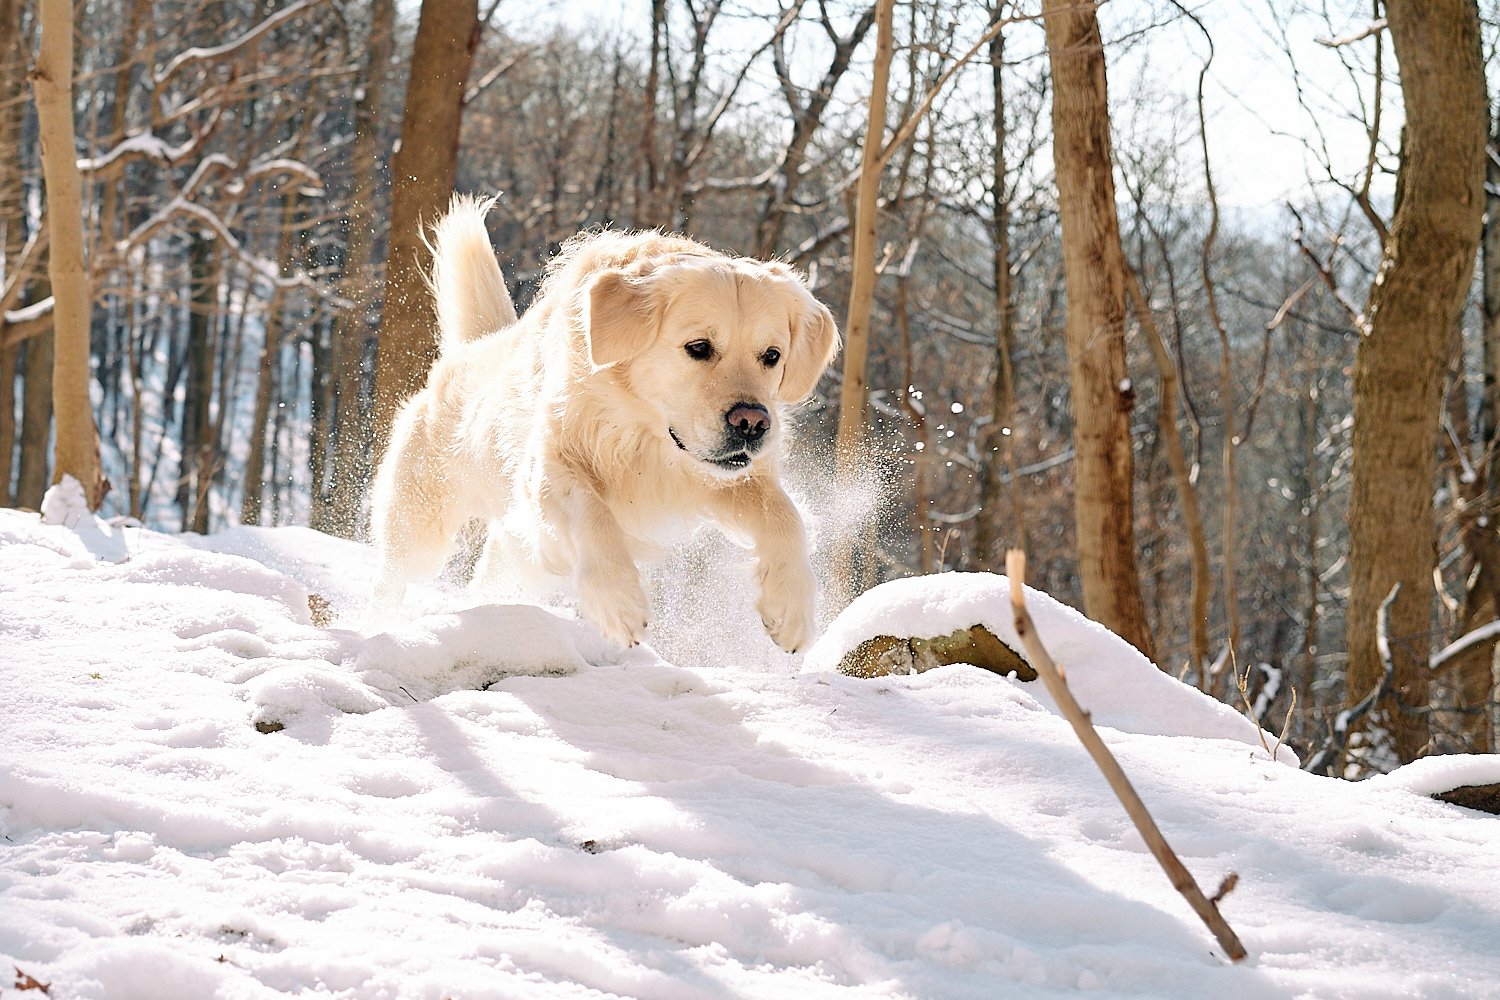  A Golden Retriever is enjoying fresh winter snow on a hiking trail in the woods of Sewickley, a Pittsburgh suburb in Western Pennsylvania. The beige-colored dog is jumping for joy in snow flakes. 